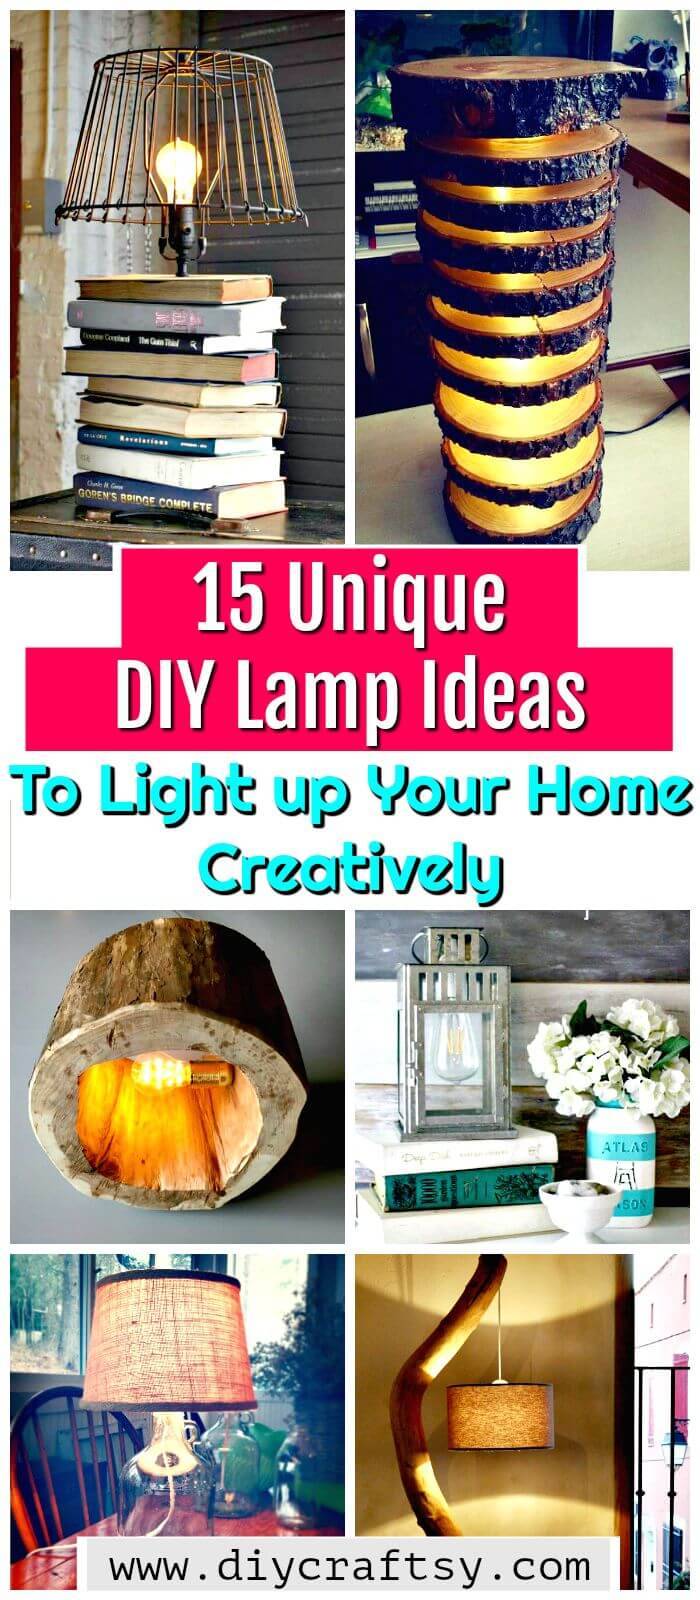 15 Unique DIY Lamp Ideas To Light up Your Home Creatively - DIY Home Decor Ideas - DIY Projects - DIY Crafts